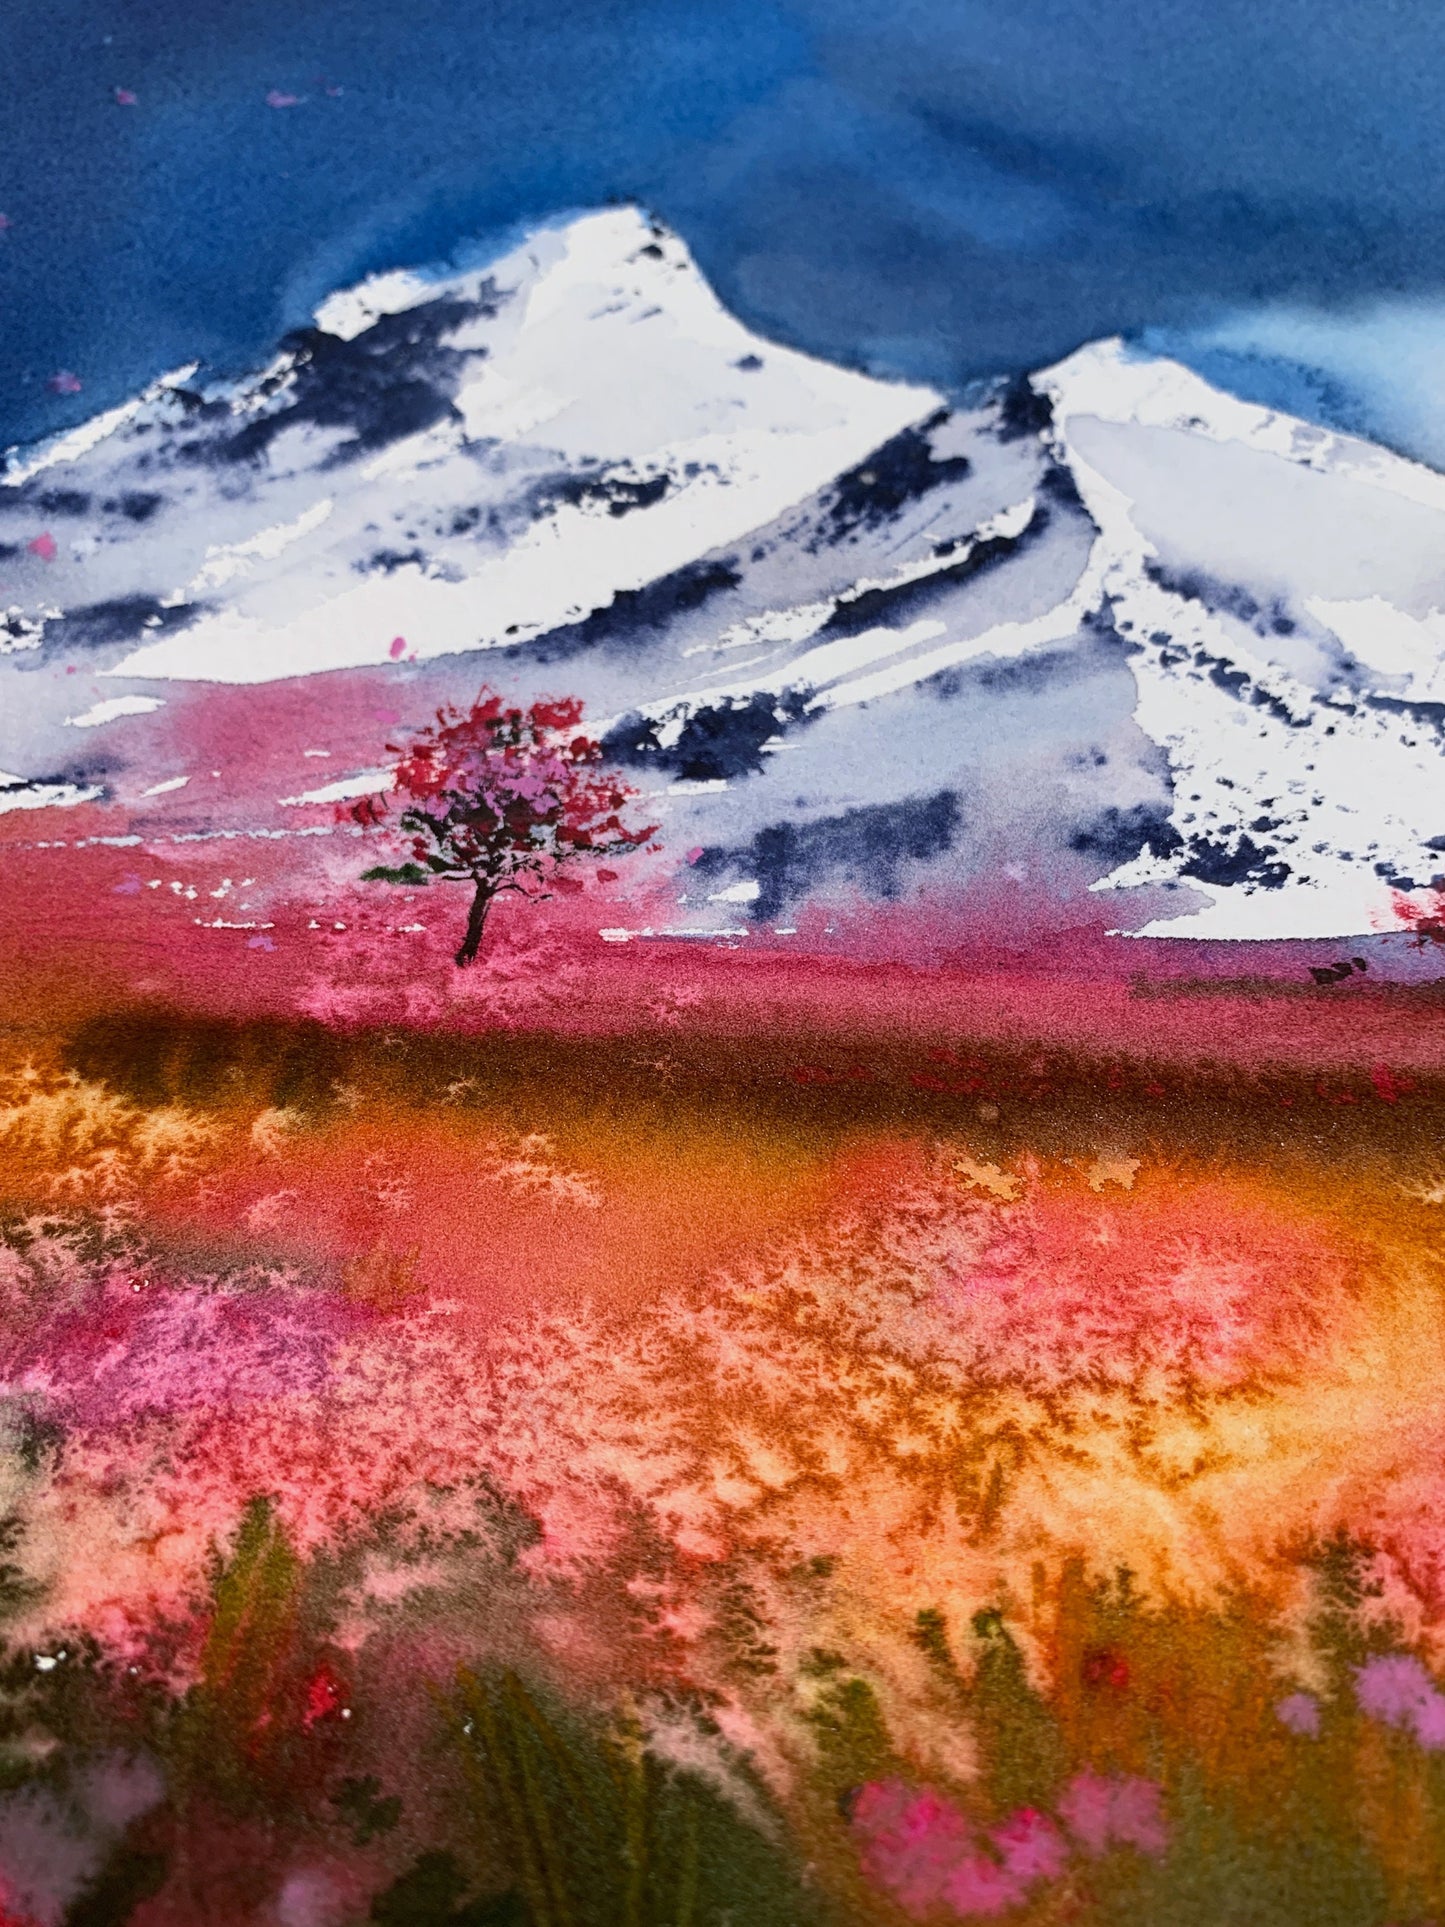 Wildflower Mountain Painting, Original Watercolor, Landscape Wall Decor, Nature Wall Art, Snow Peak Mountains, Gift